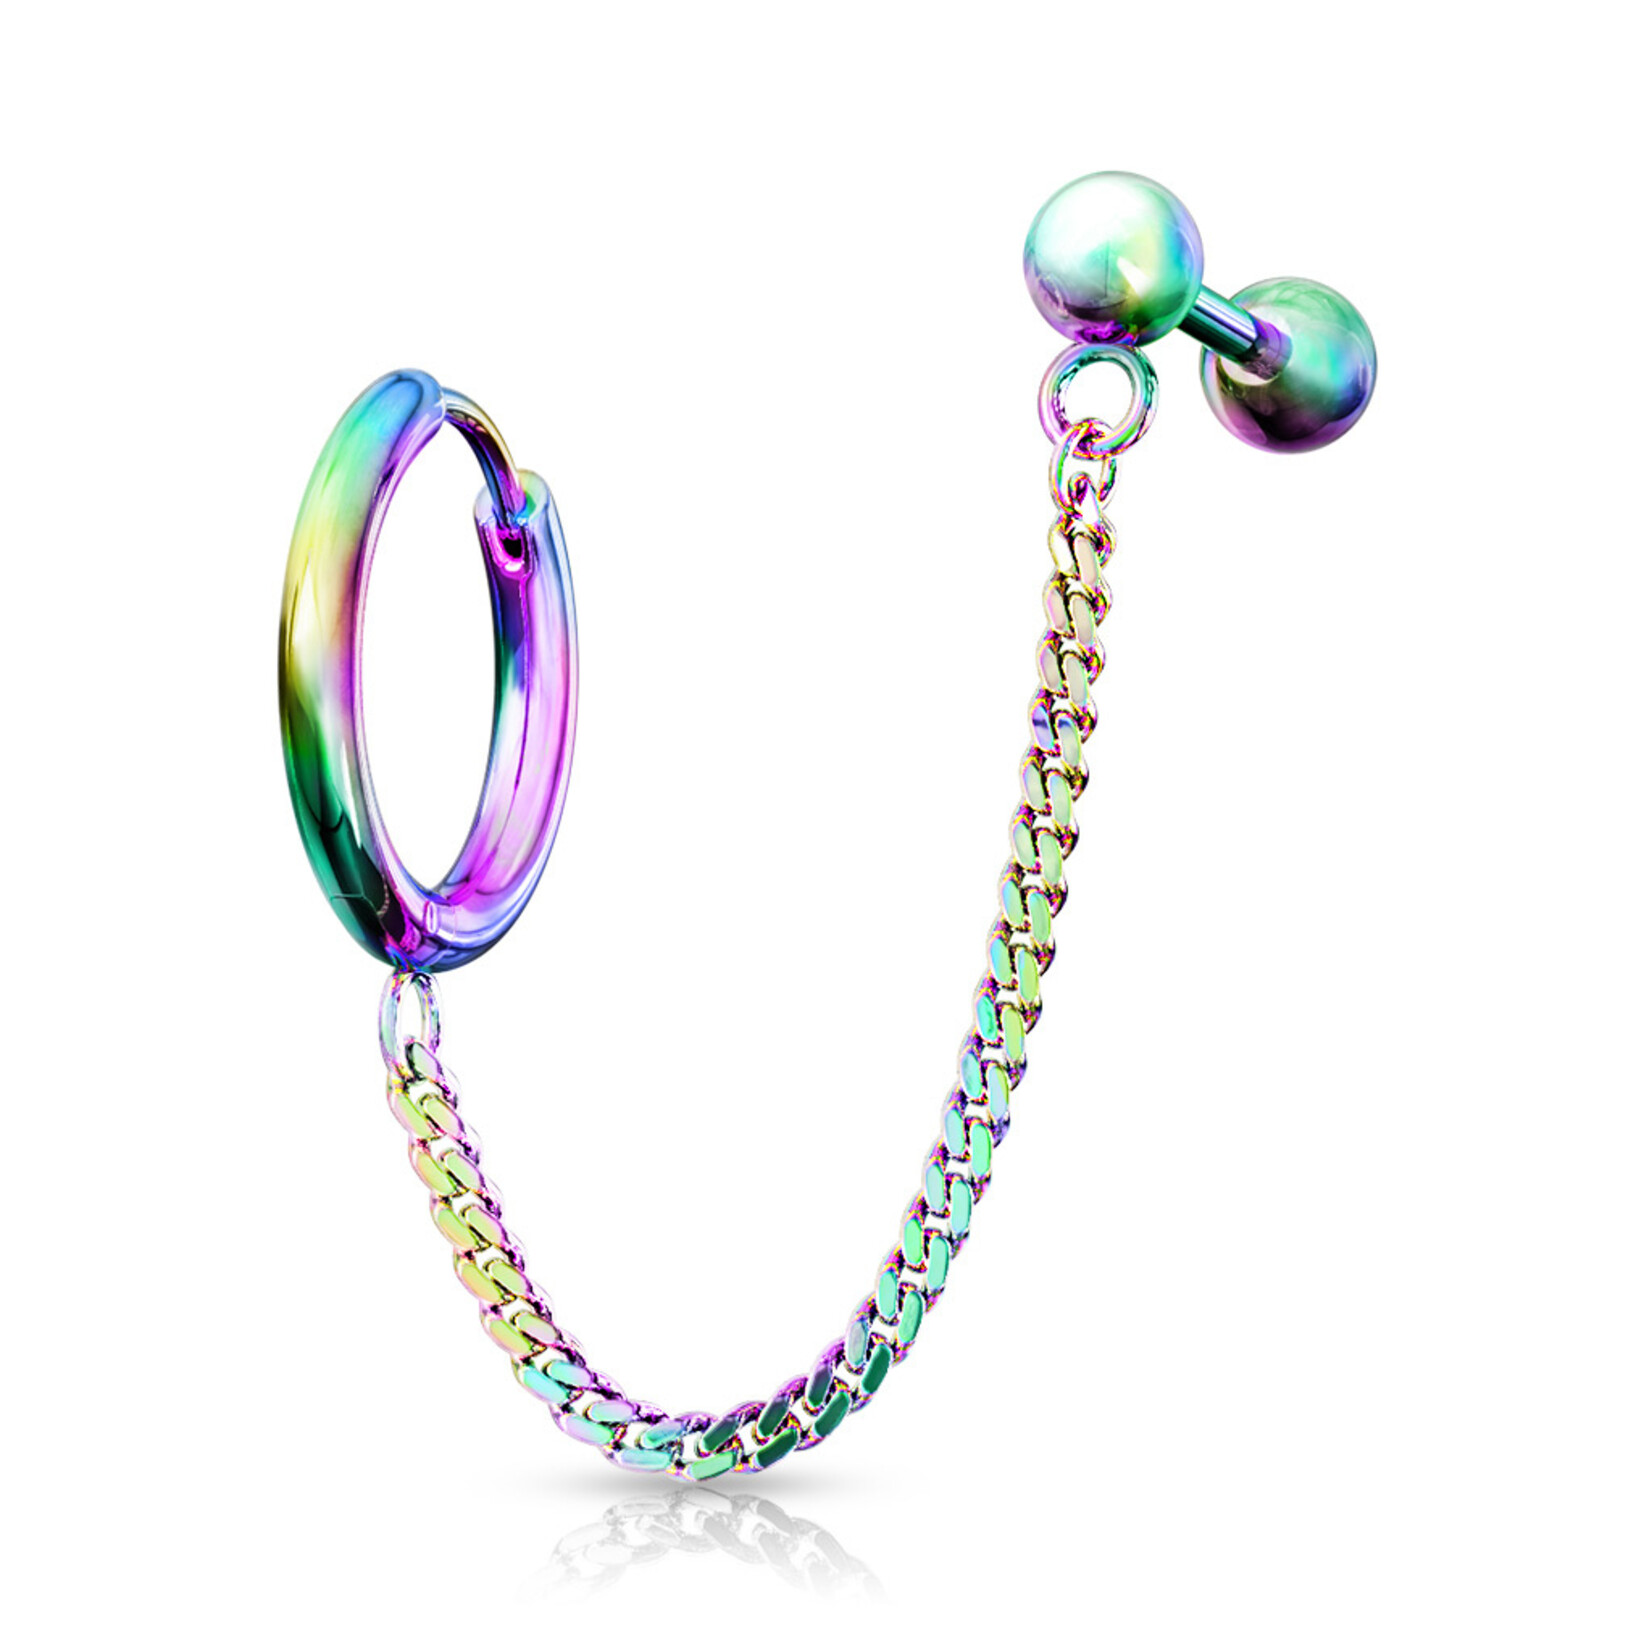 Body Jewerly Round Clicker Hoop Earring and Chain Linked Cartilage Barbell